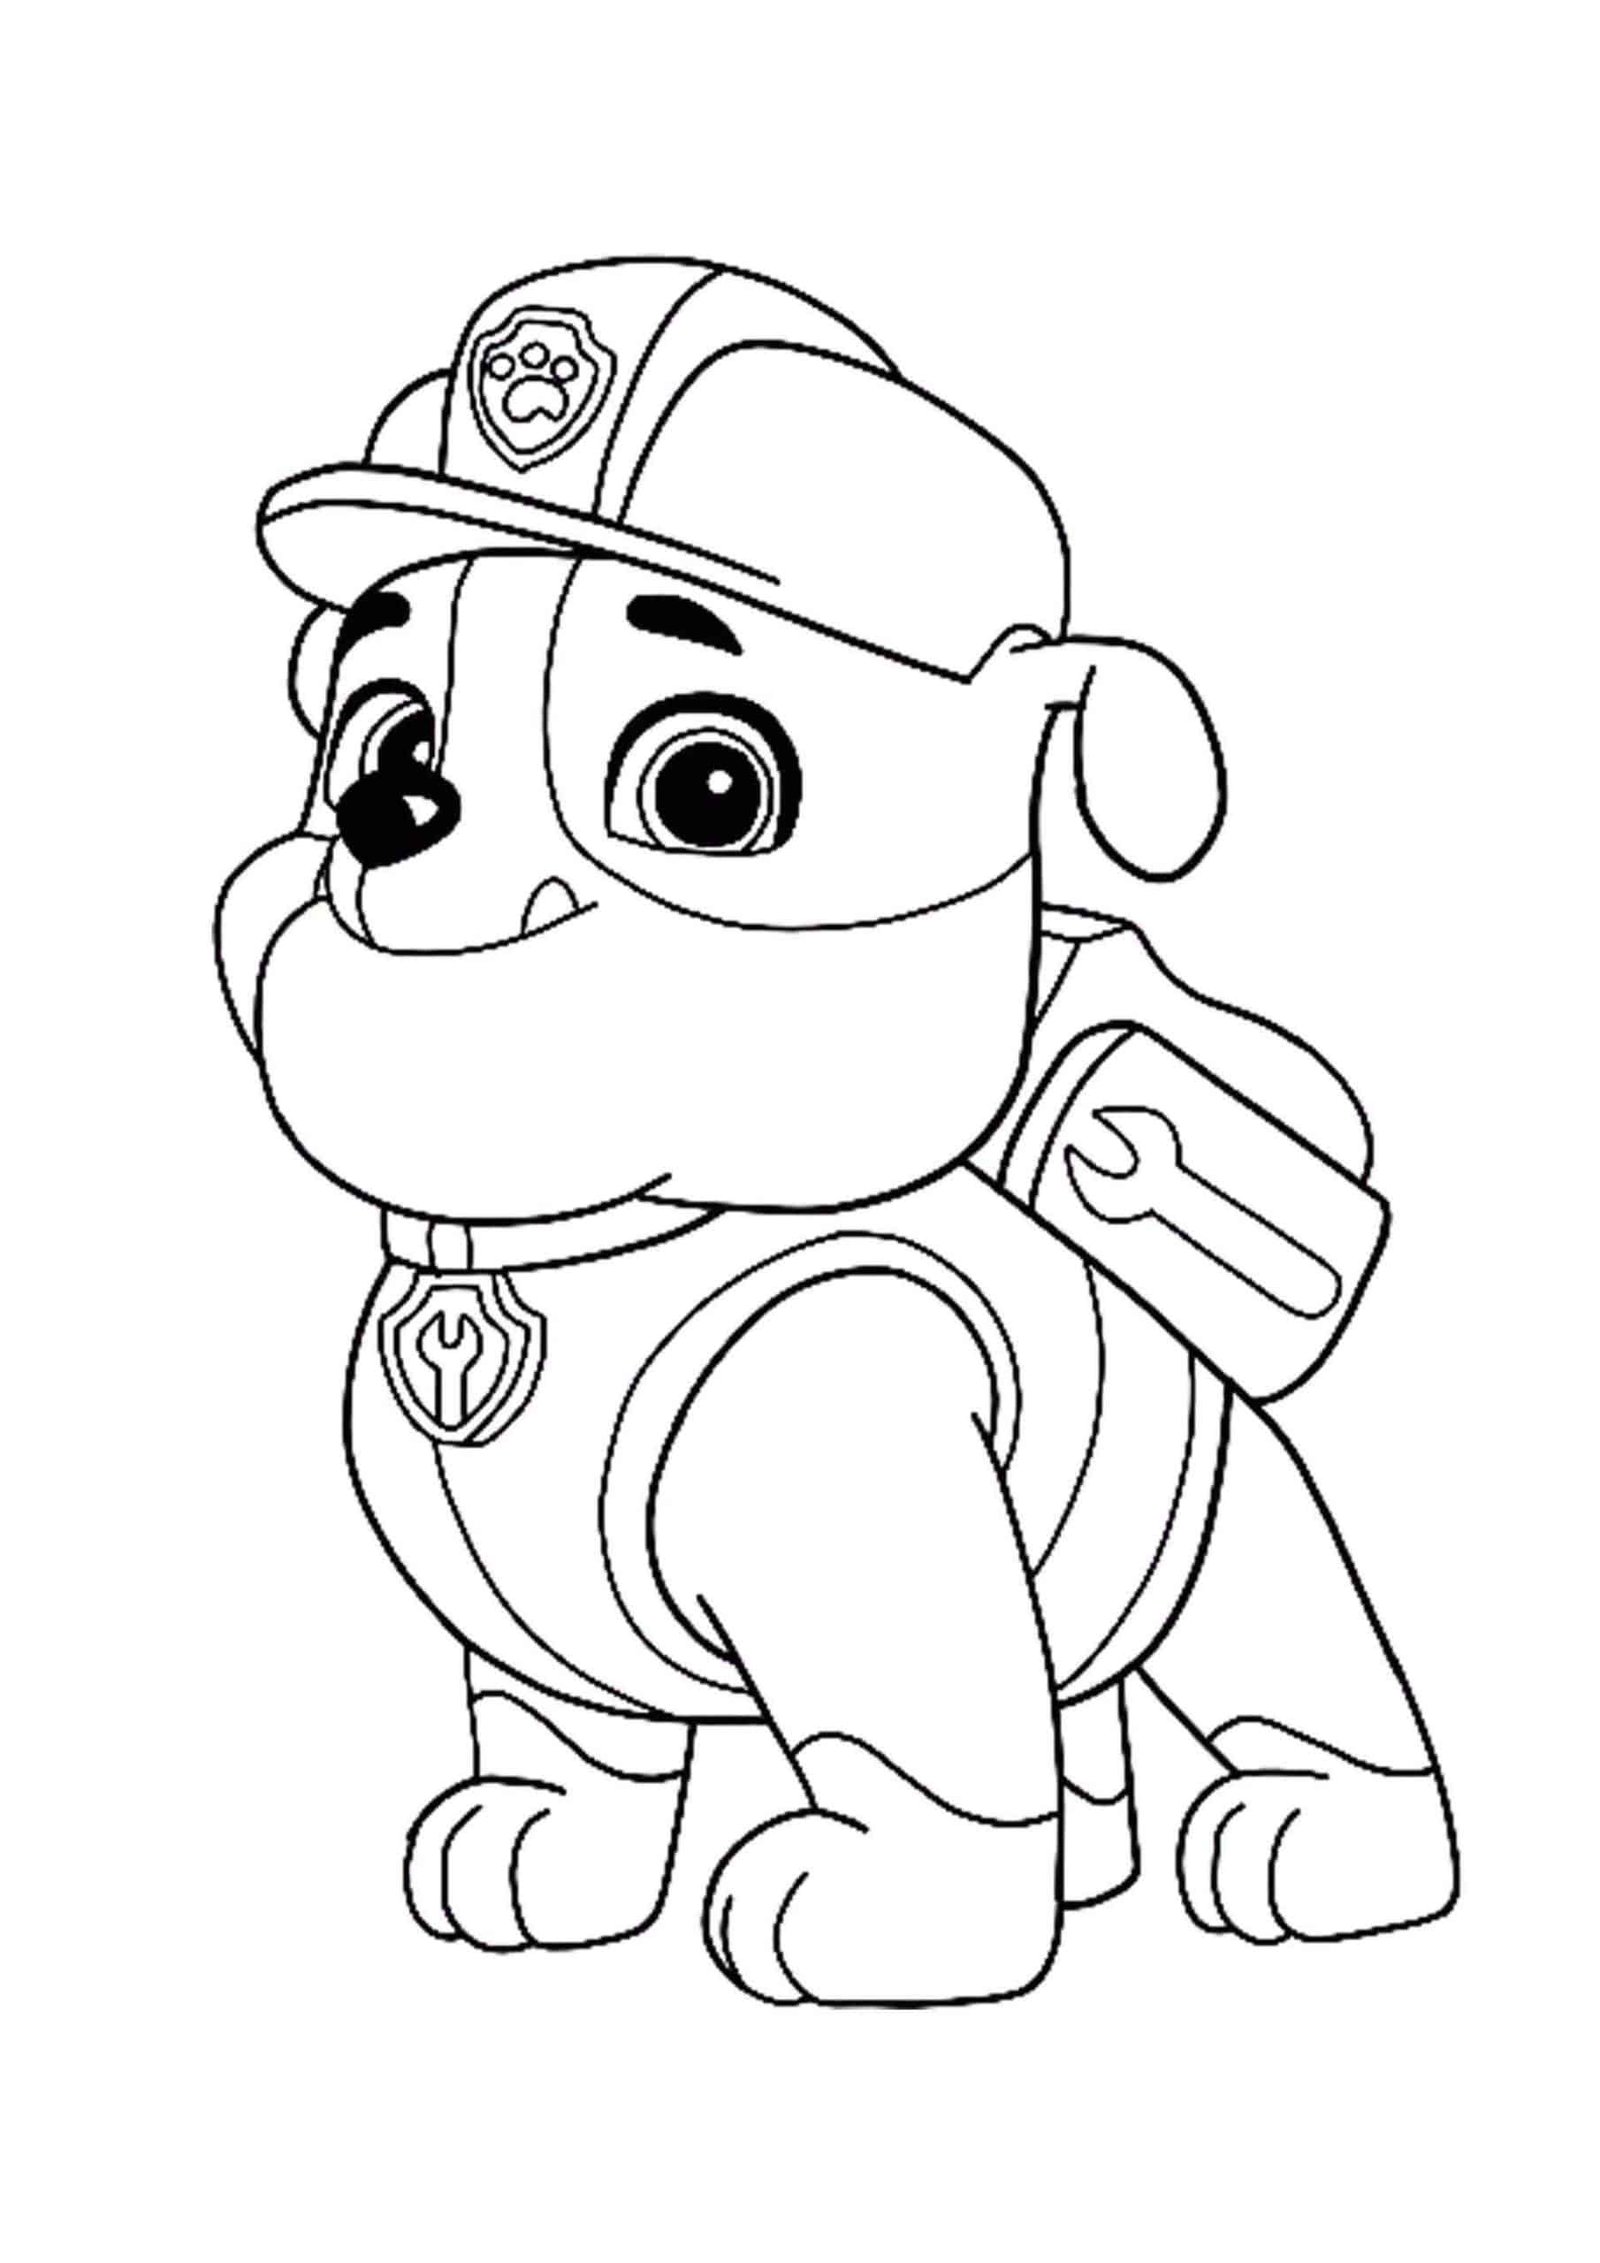 Paw patrol rubble coloring pages